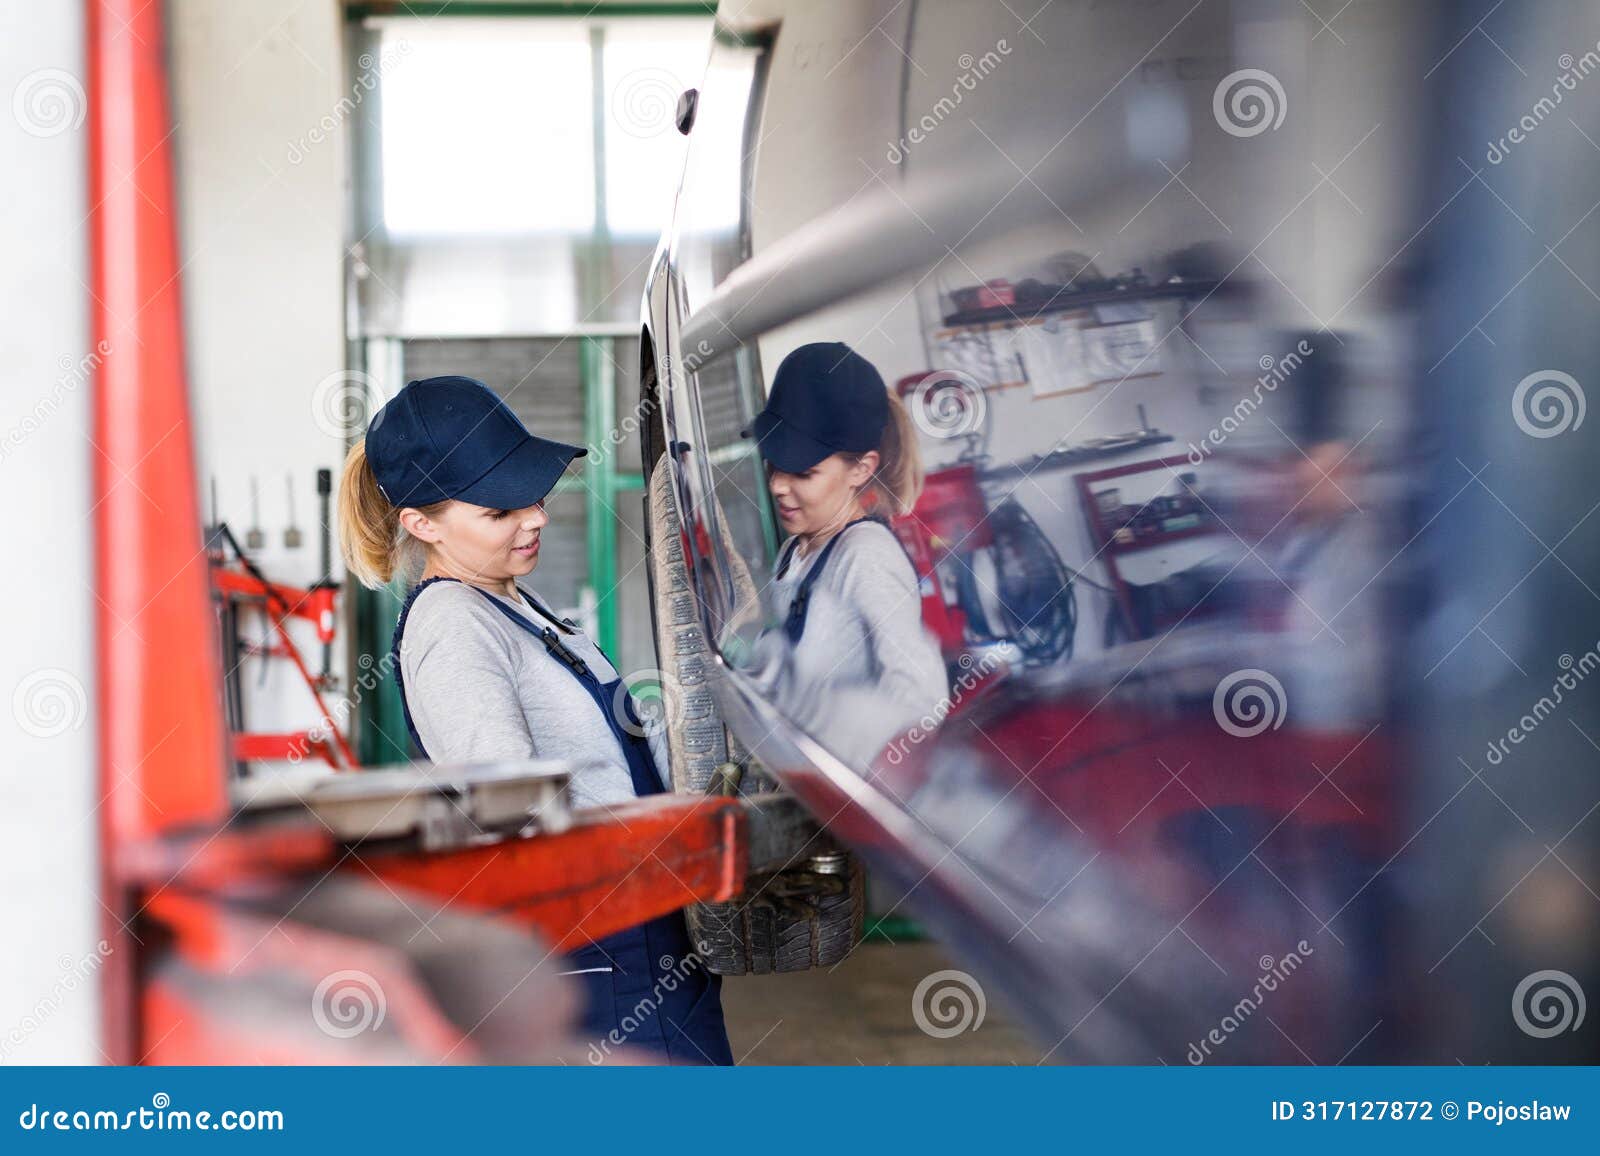 female auto mechanic changing tieres in auto service. beautiful woman holding tire in a garage, wearing blue coveralls.